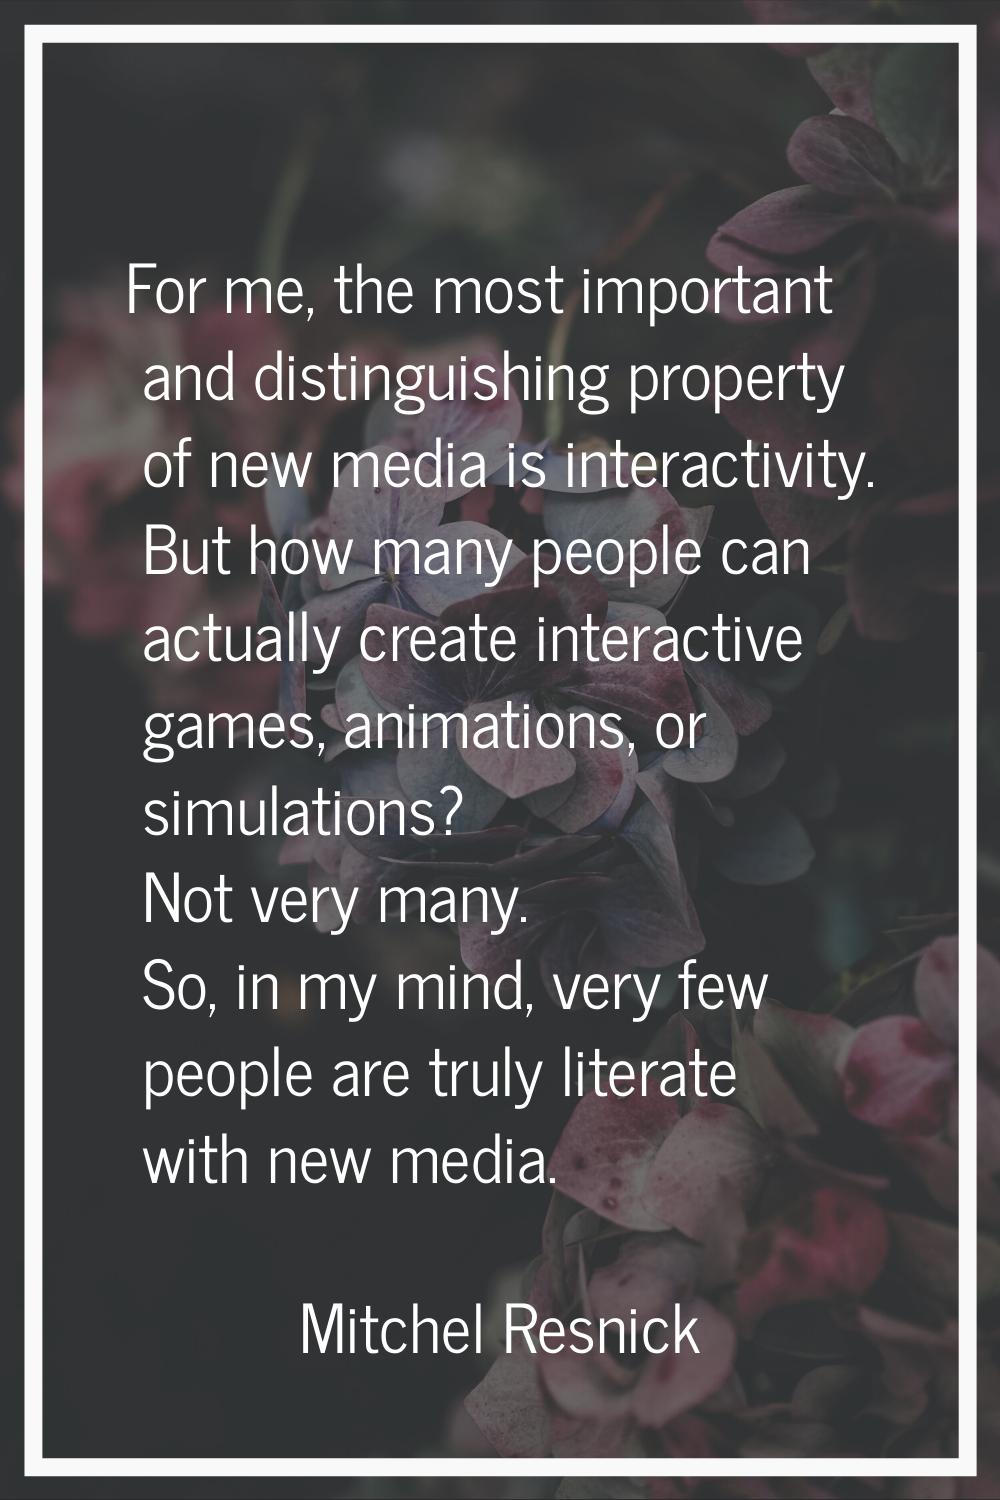 For me, the most important and distinguishing property of new media is interactivity. But how many 